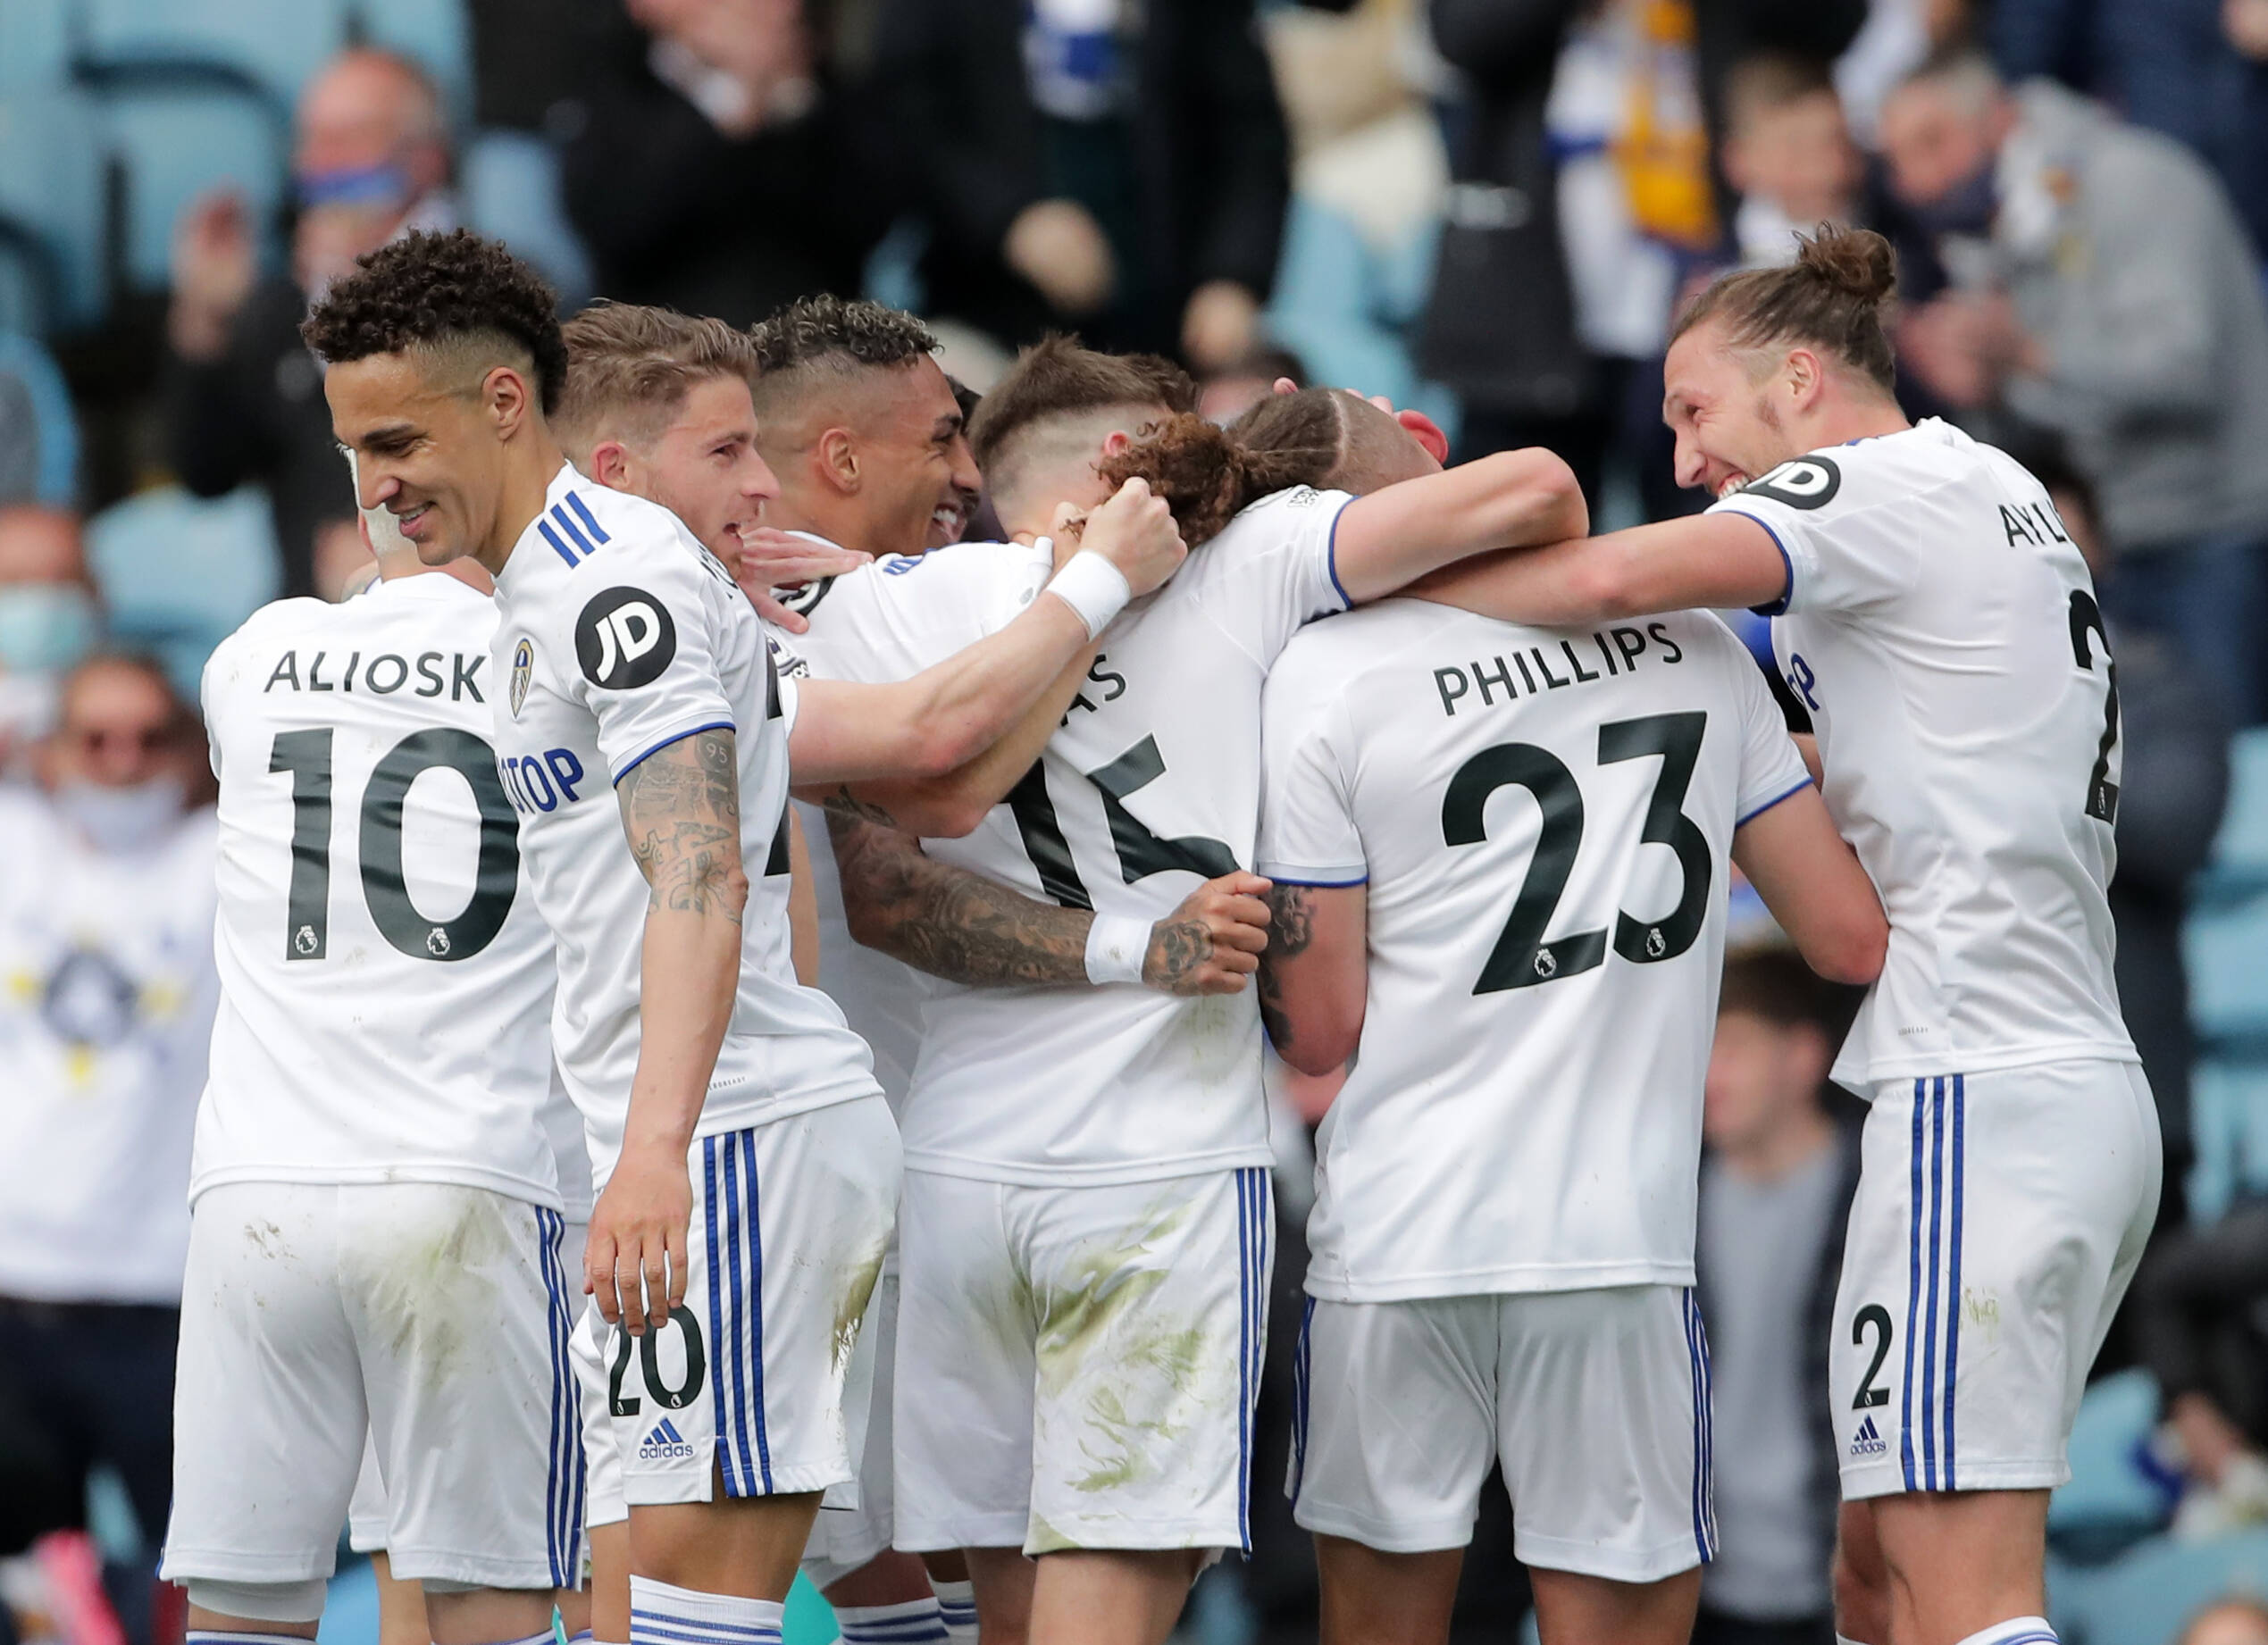 A Complete Leeds United 2020/21 Season Review - A successful one.